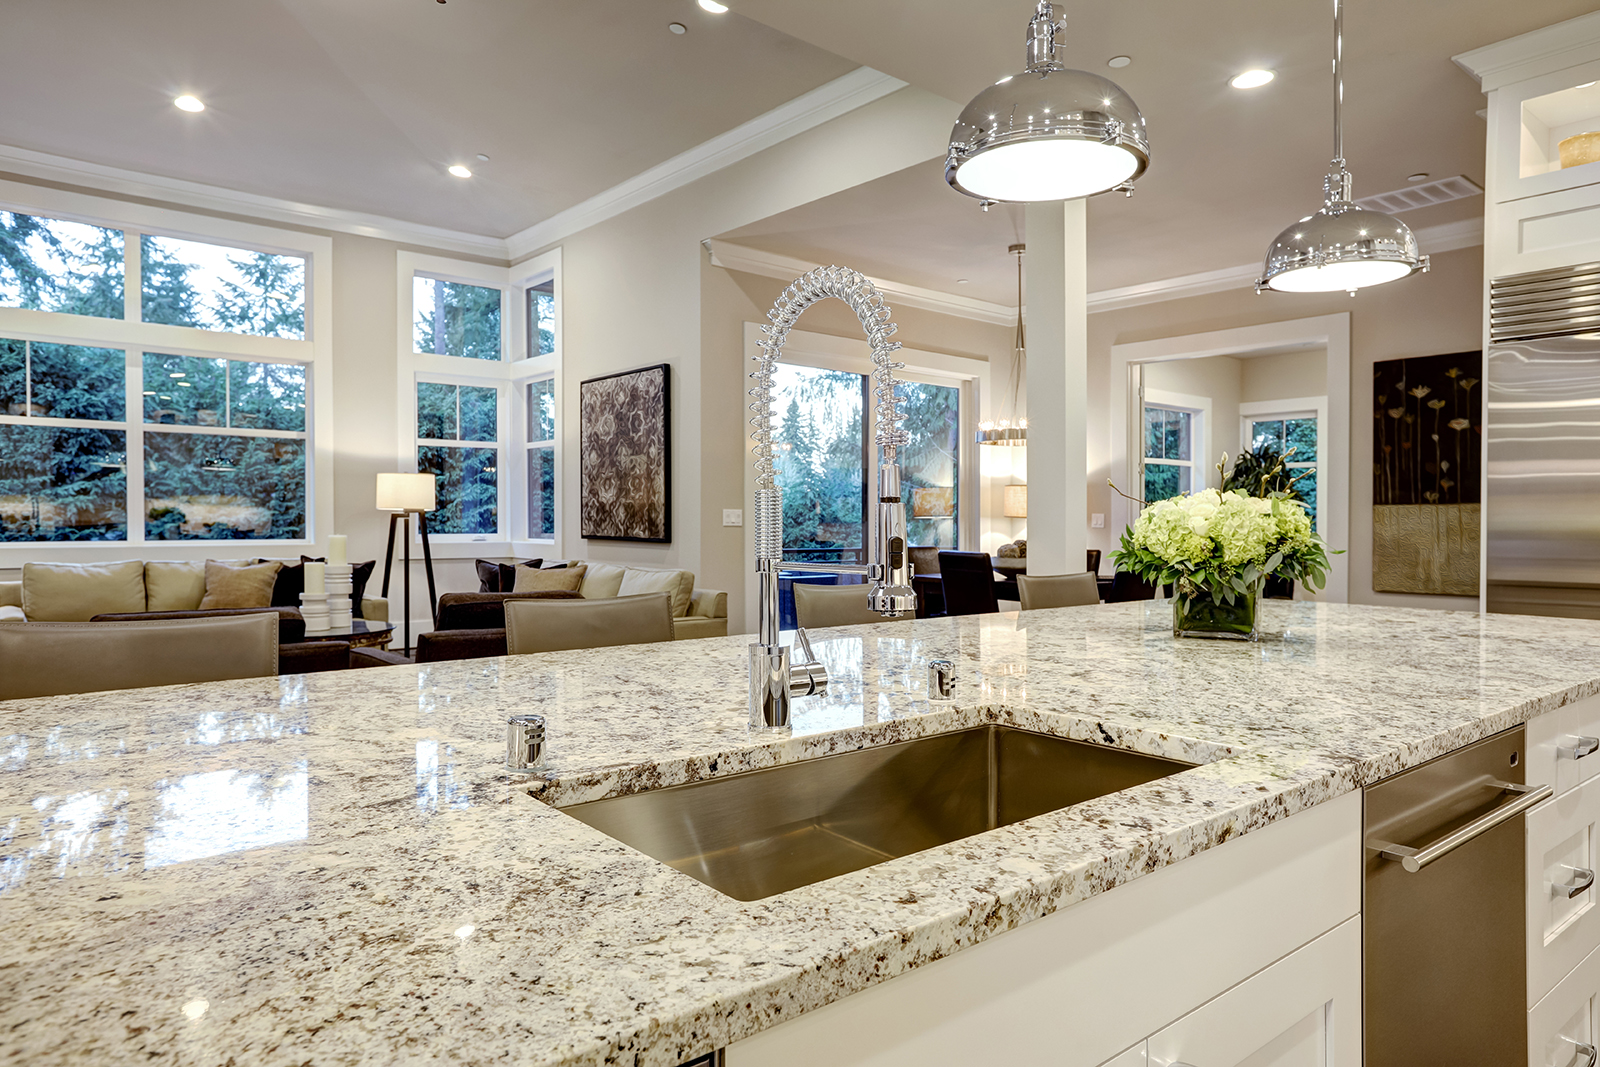 Three Things You Didn’t Know About Natural Stone Countertops